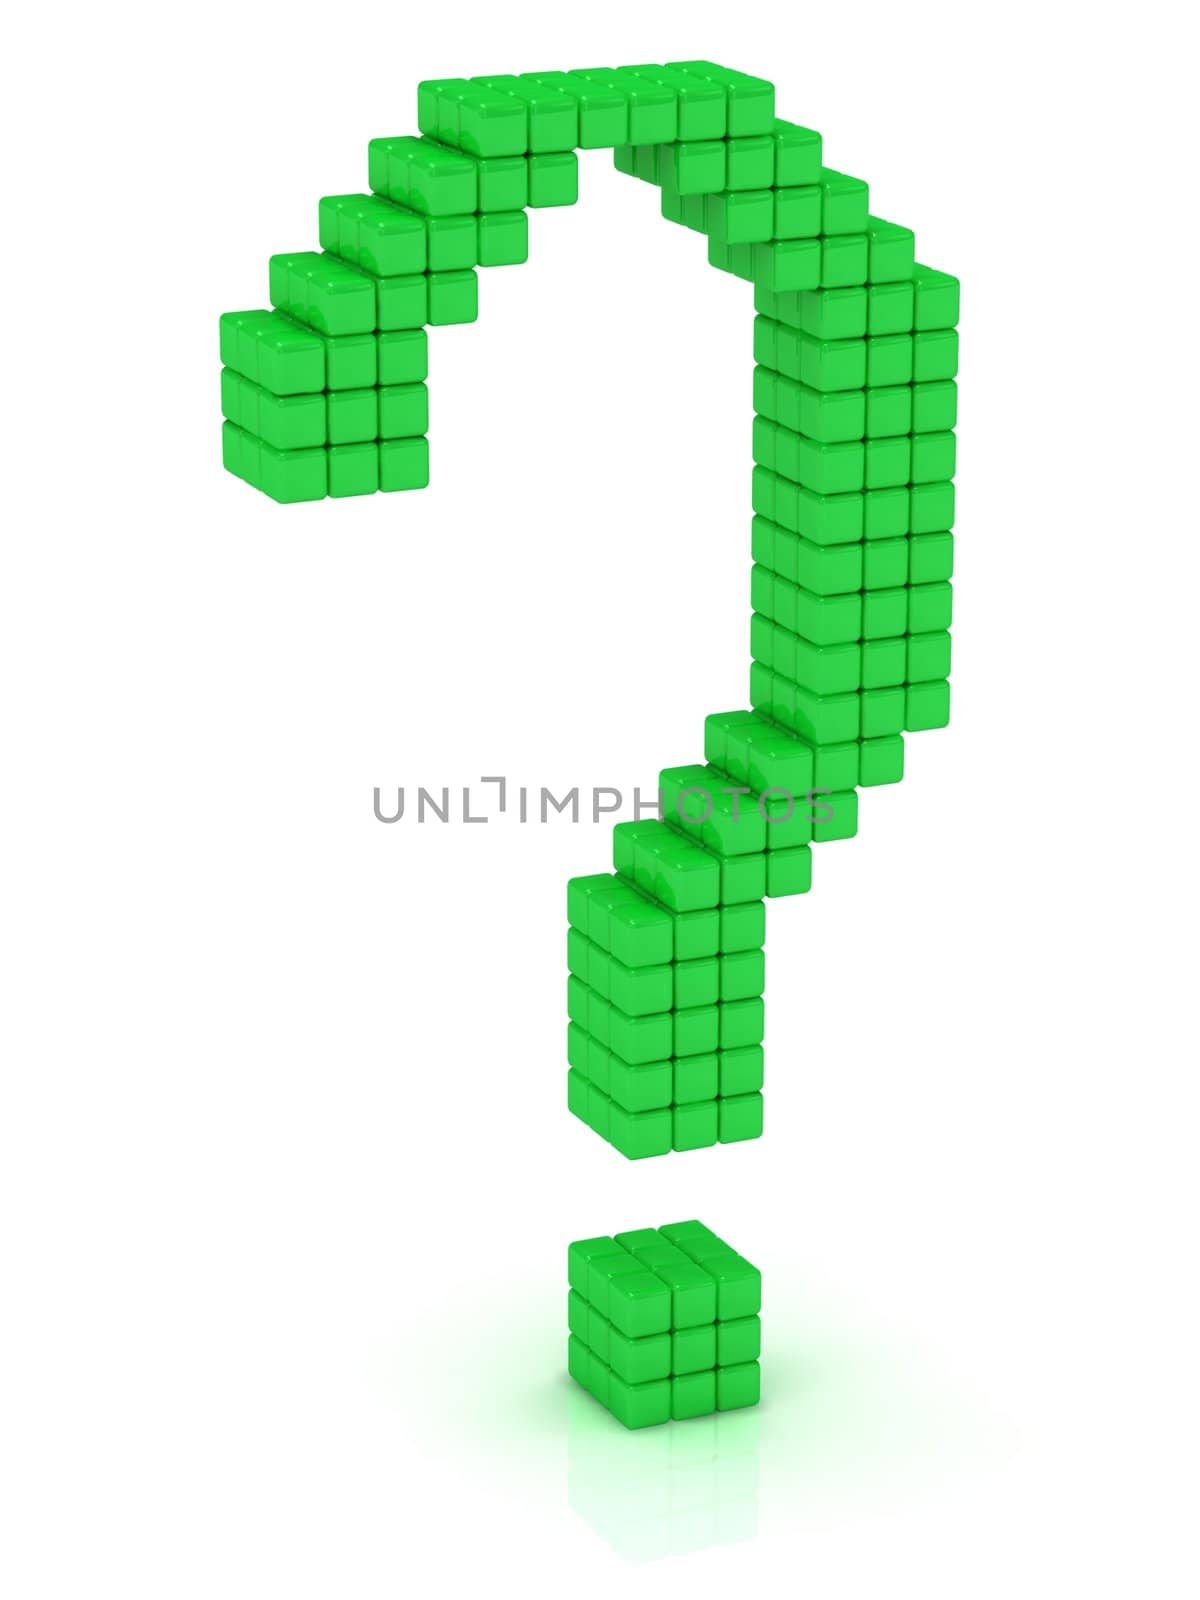 Green question mark cube by GreenMost